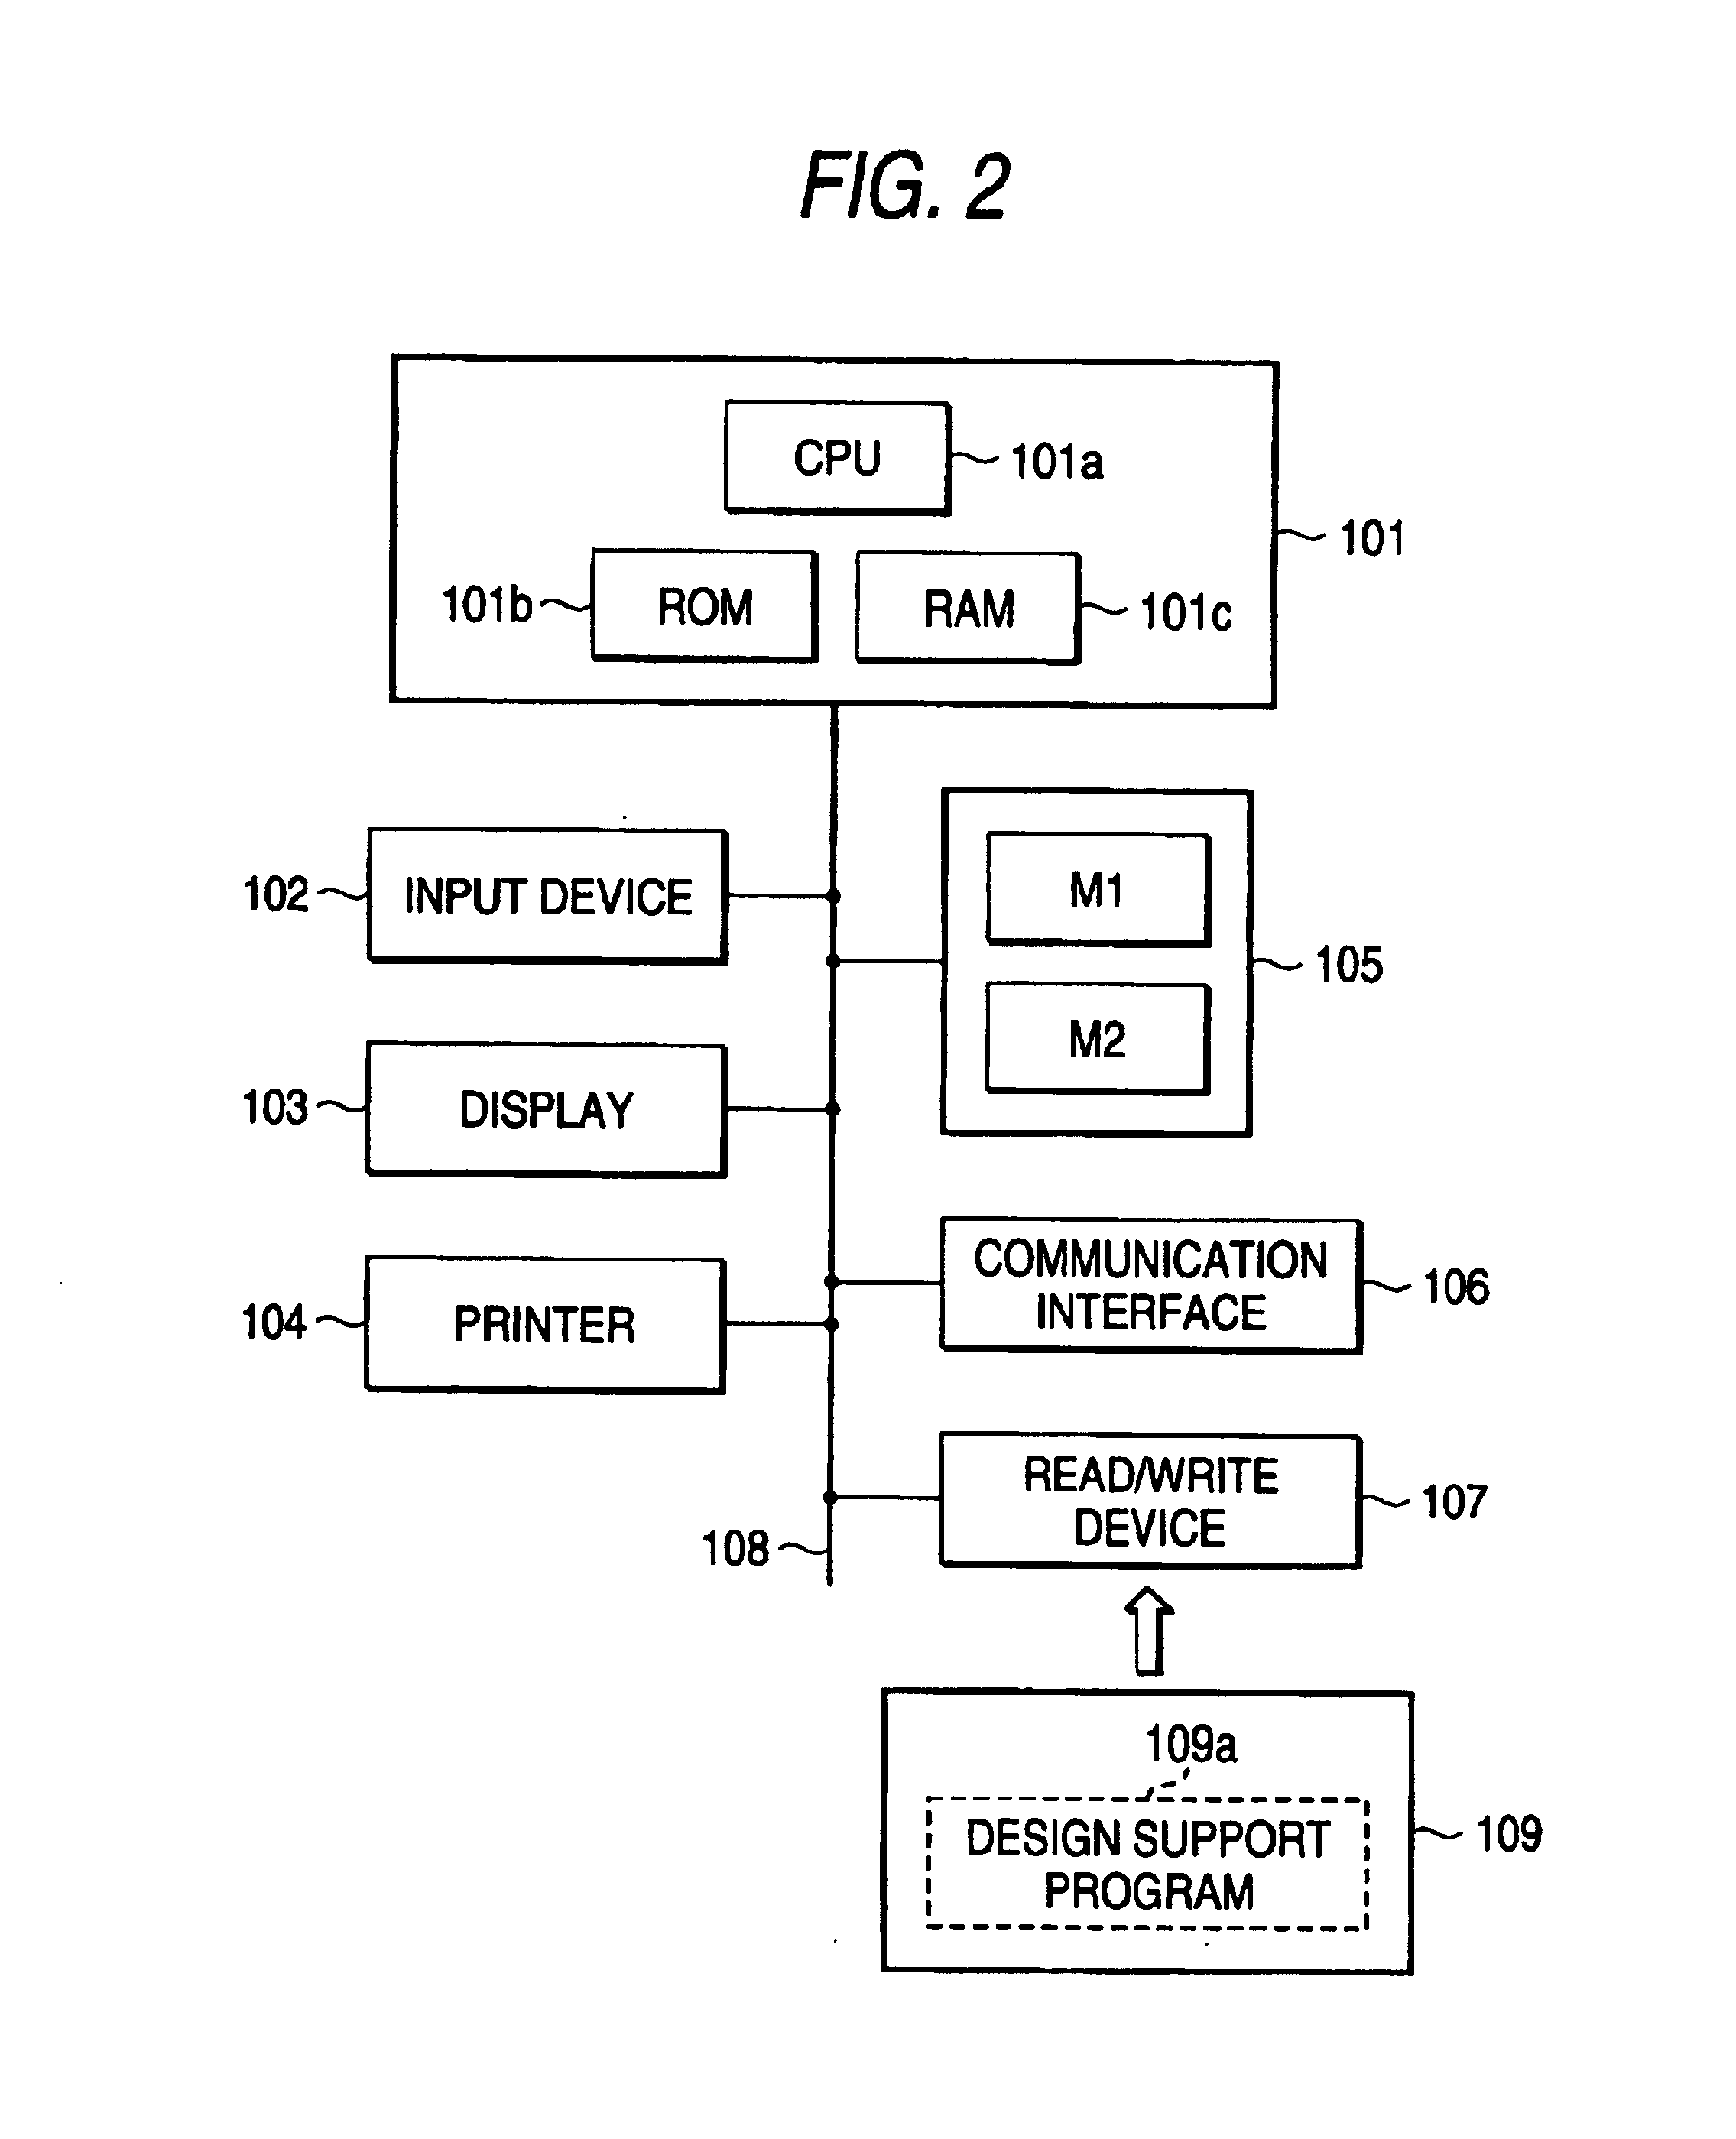 Wire harness design support system